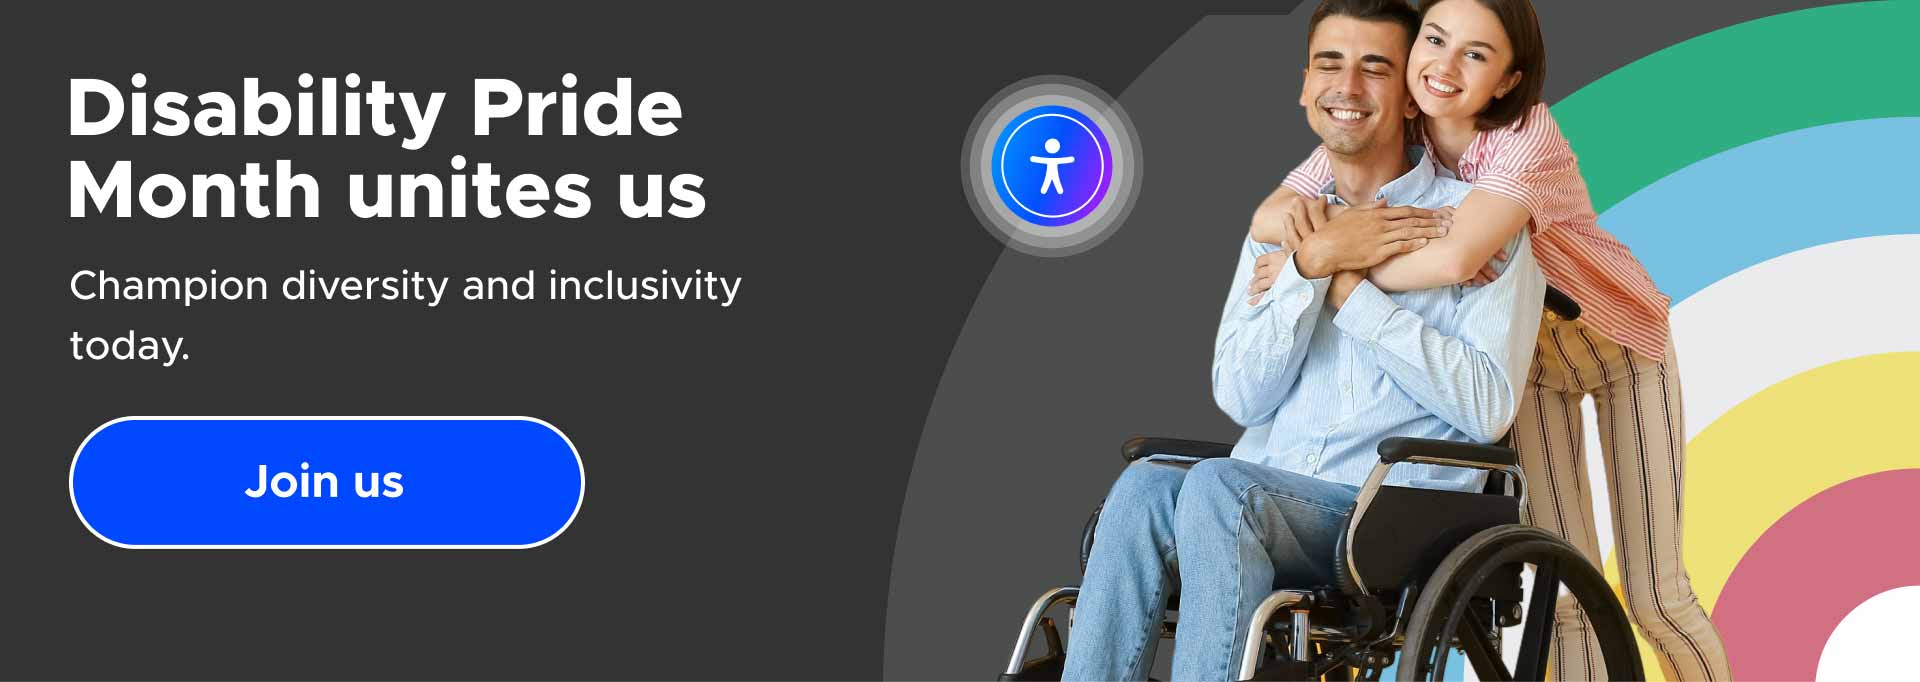 Smiling man in wheelchair with woman hugging him, text "Disability Pride Month unites us," join button.